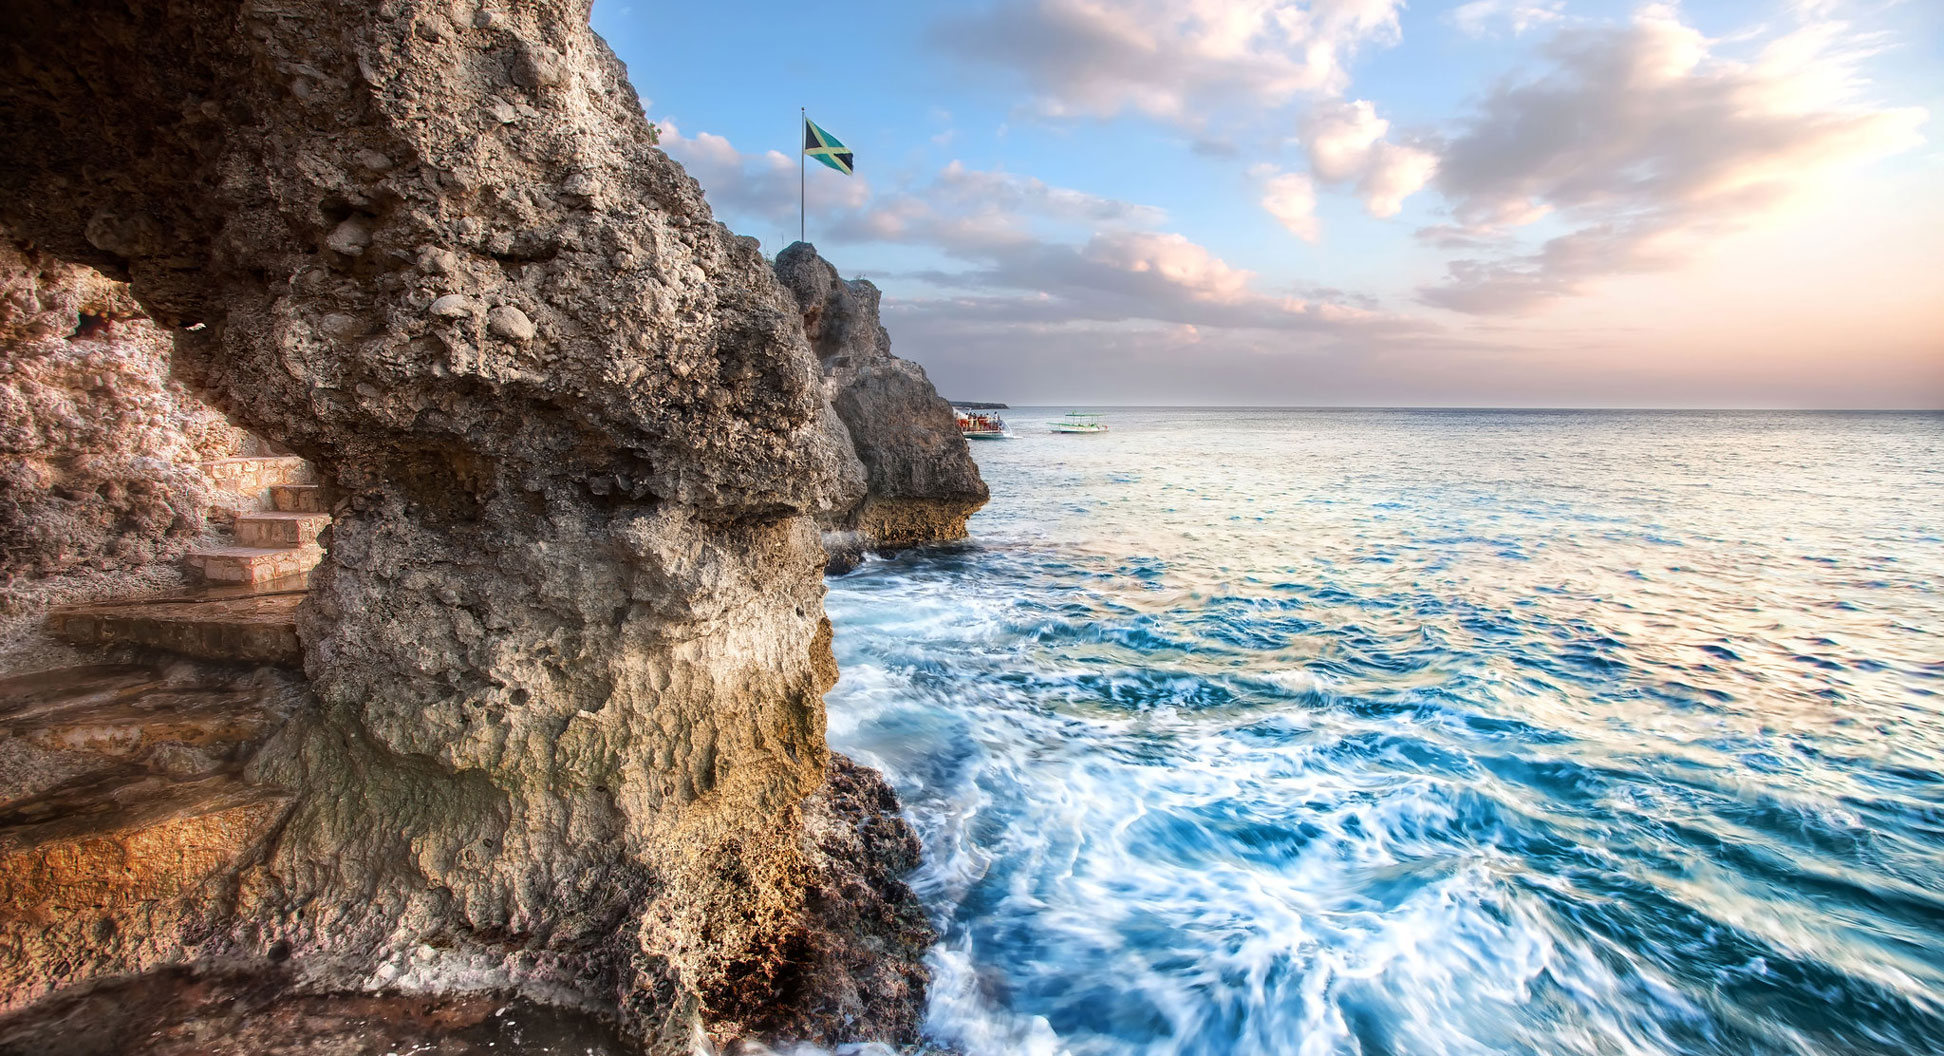 'Where the Ocean Meets the Sky', Jamaica, Negril, West Side Cliffs.
Image by Chris Ford